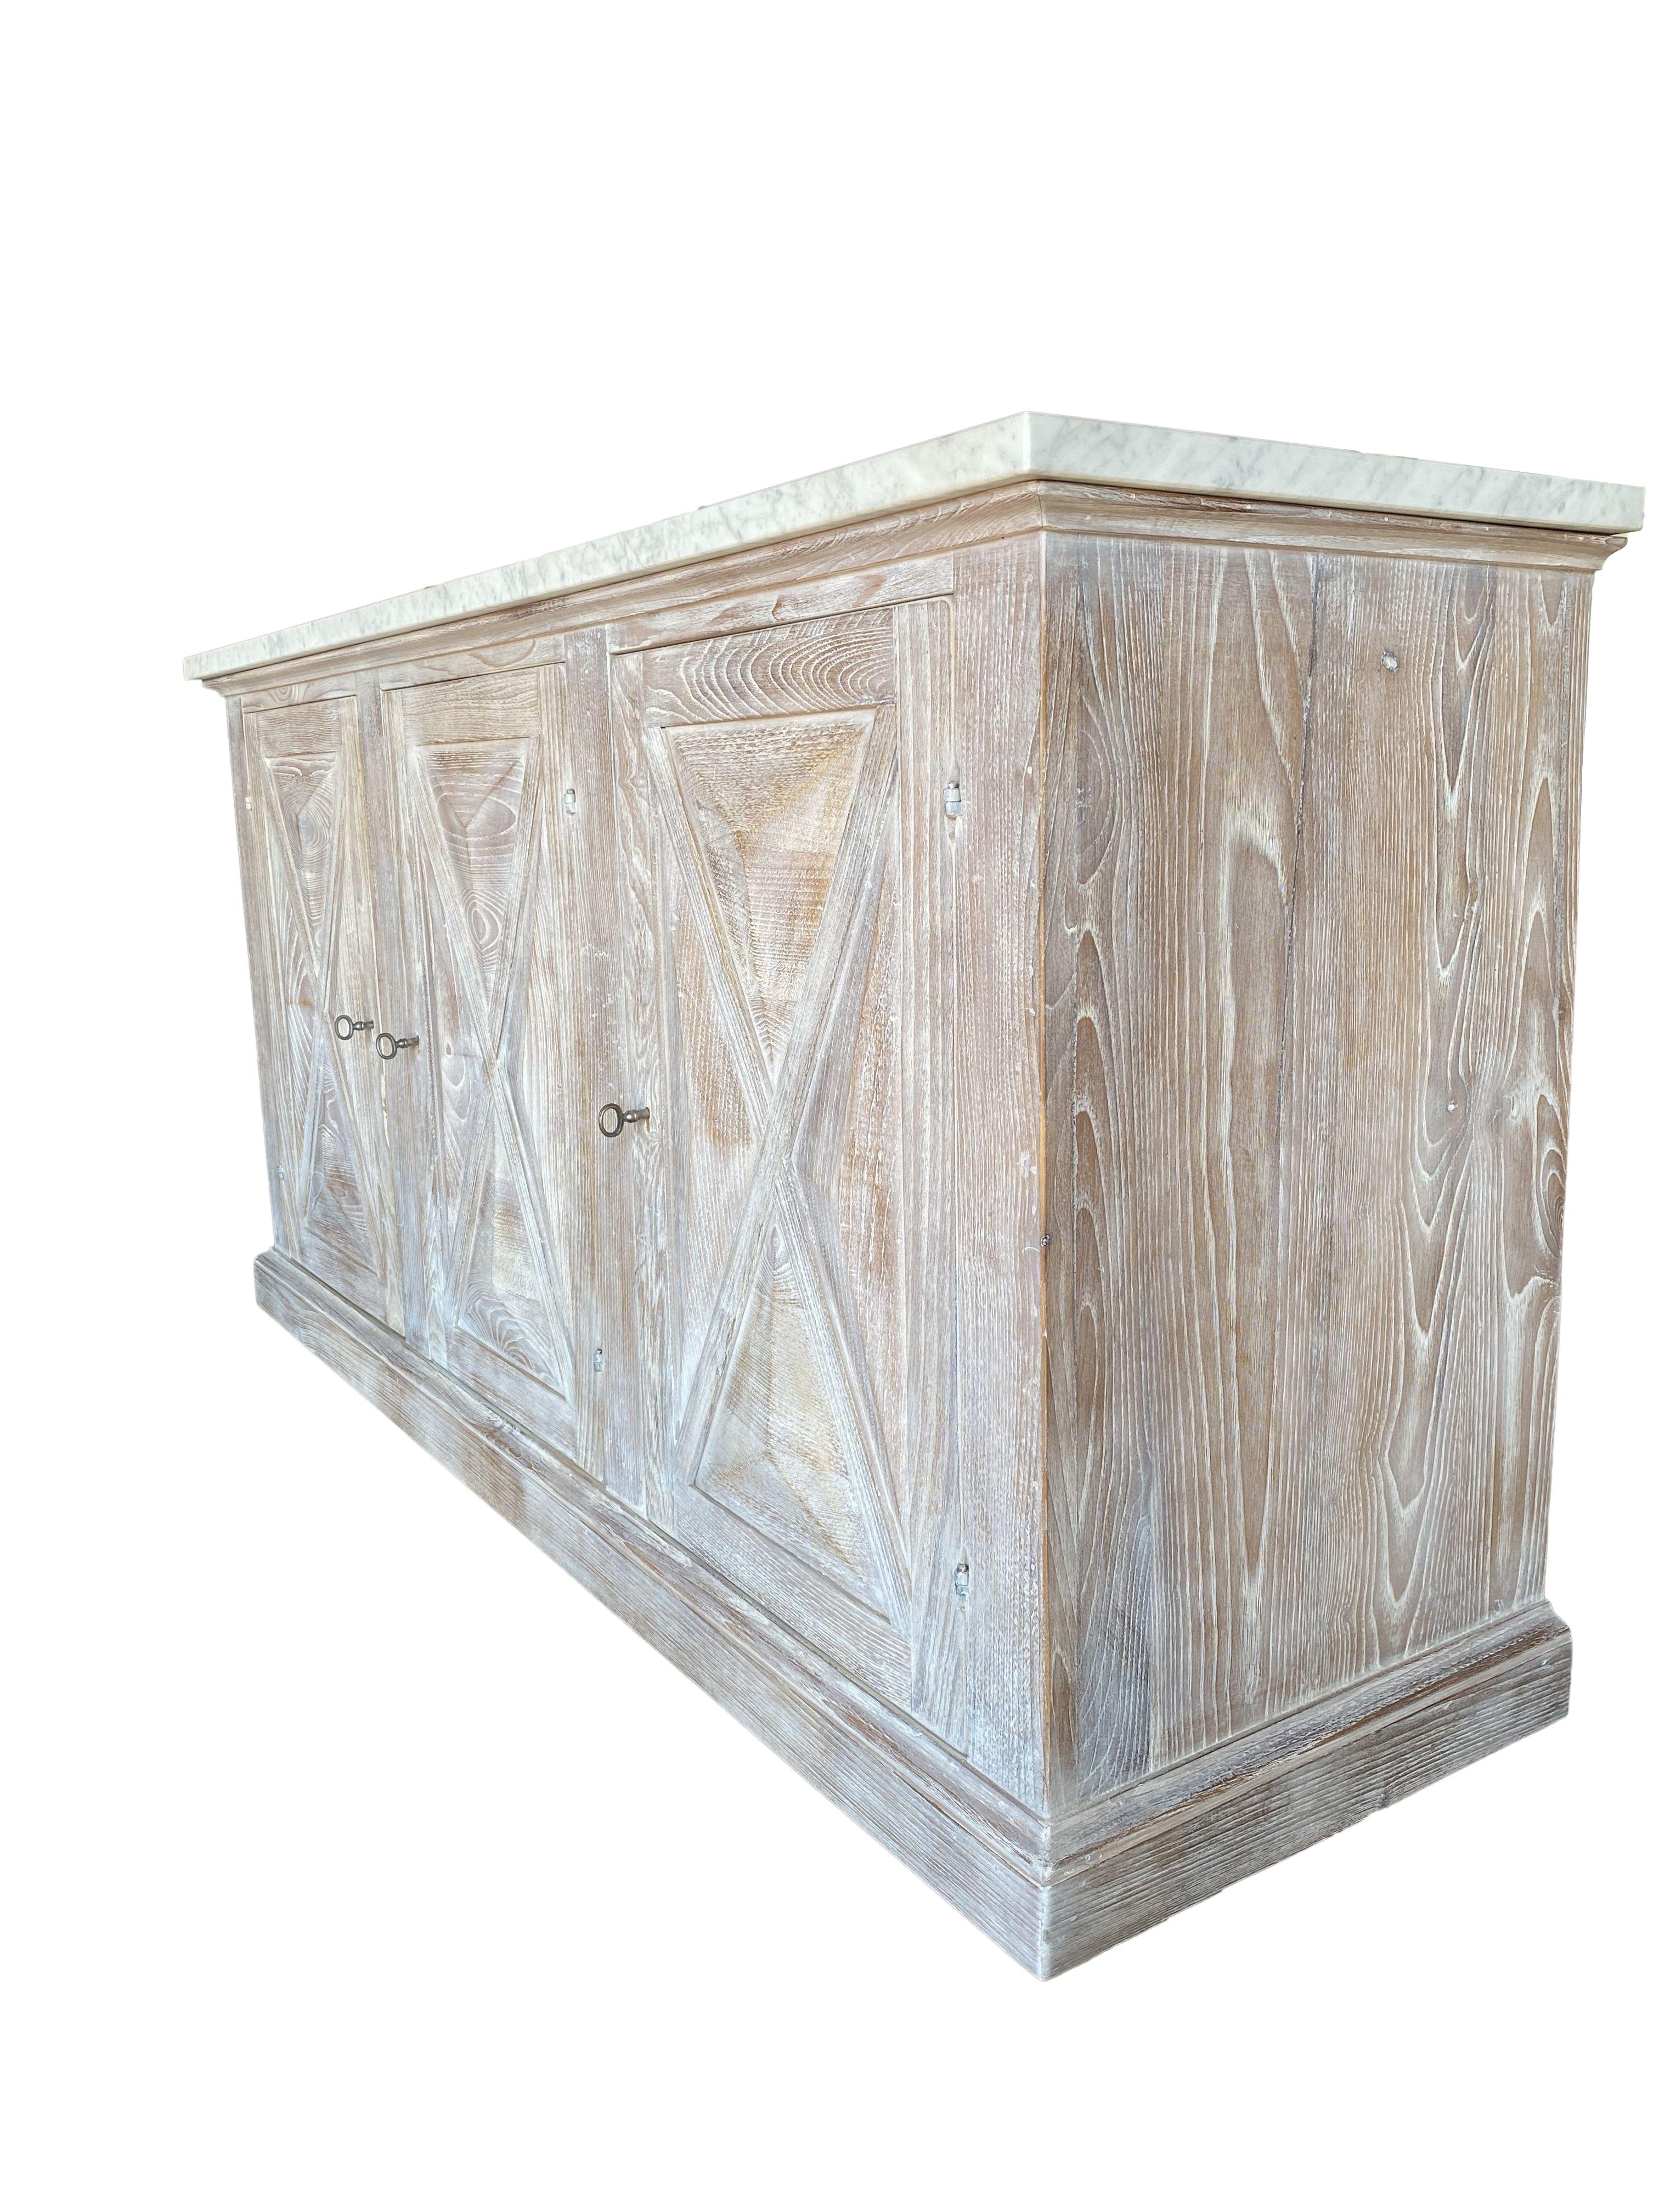 “ALPI” - Exclusive custom handcrafted Mediterranean style credenza line featuring our solid Italian Old Chestnut with a brushed finish we’ve named Dolomiti, after the famous limestone ridges high in the Italian Alps. Our cabinet is topped with a